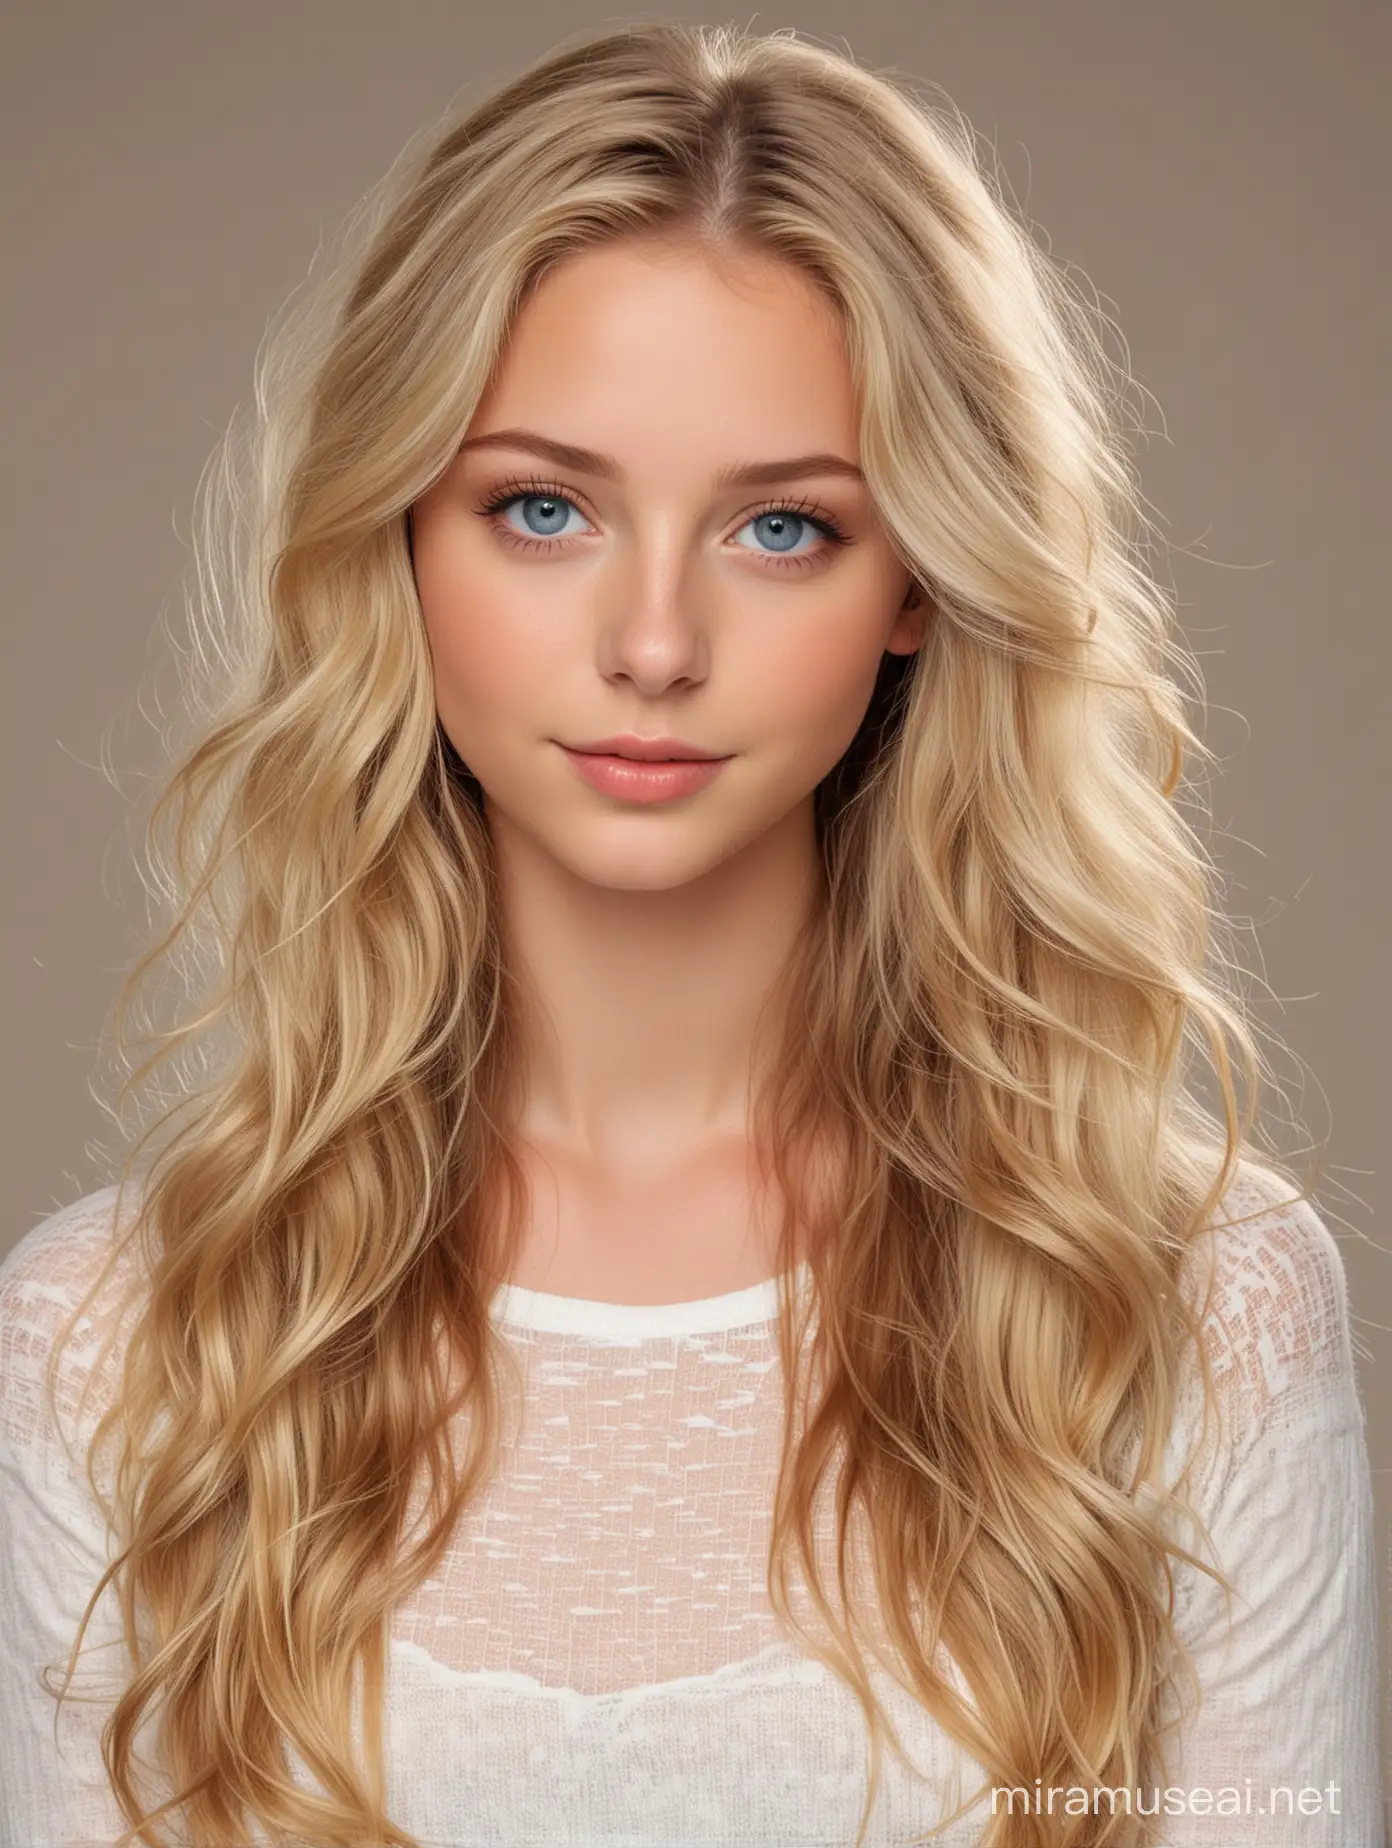 18 years old sweet cute adorable extremely cute long straight wavy blonde hair blue eyes modeling  full body full view  